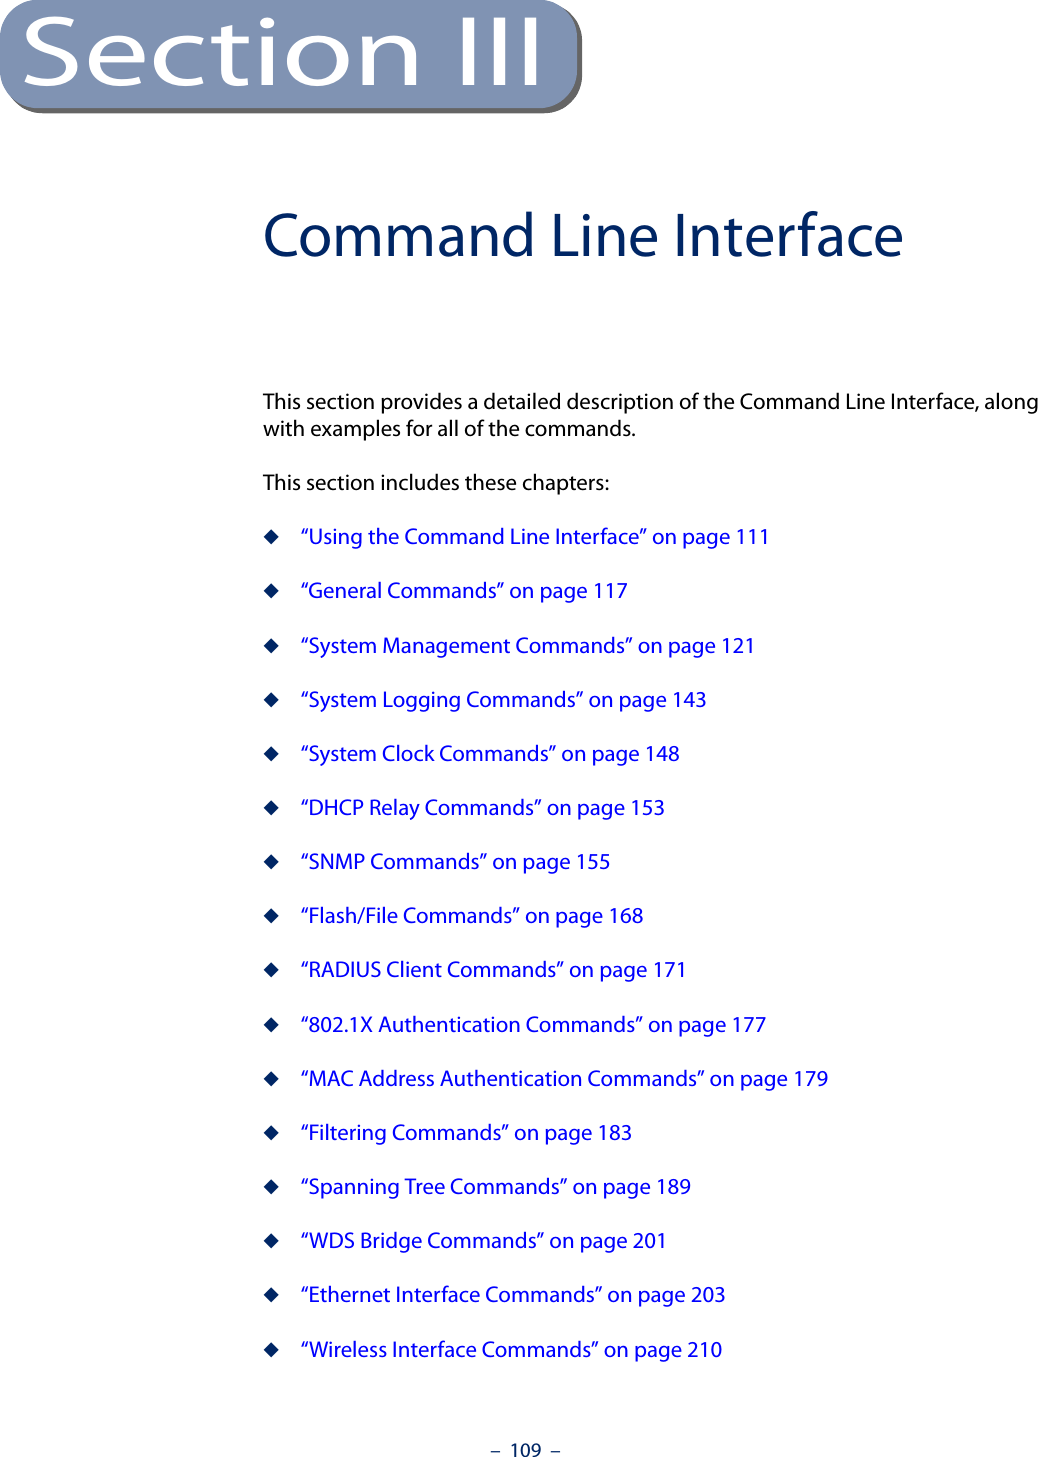 –  109  –Section IIICommand Line InterfaceThis section provides a detailed description of the Command Line Interface, along with examples for all of the commands. This section includes these chapters:◆“Using the Command Line Interface” on page 111◆“General Commands” on page 117◆“System Management Commands” on page 121◆“System Logging Commands” on page 143◆“System Clock Commands” on page 148◆“DHCP Relay Commands” on page 153◆“SNMP Commands” on page 155◆“Flash/File Commands” on page 168◆“RADIUS Client Commands” on page 171◆“802.1X Authentication Commands” on page 177◆“MAC Address Authentication Commands” on page 179◆“Filtering Commands” on page 183◆“Spanning Tree Commands” on page 189◆“WDS Bridge Commands” on page 201◆“Ethernet Interface Commands” on page 203◆“Wireless Interface Commands” on page 210